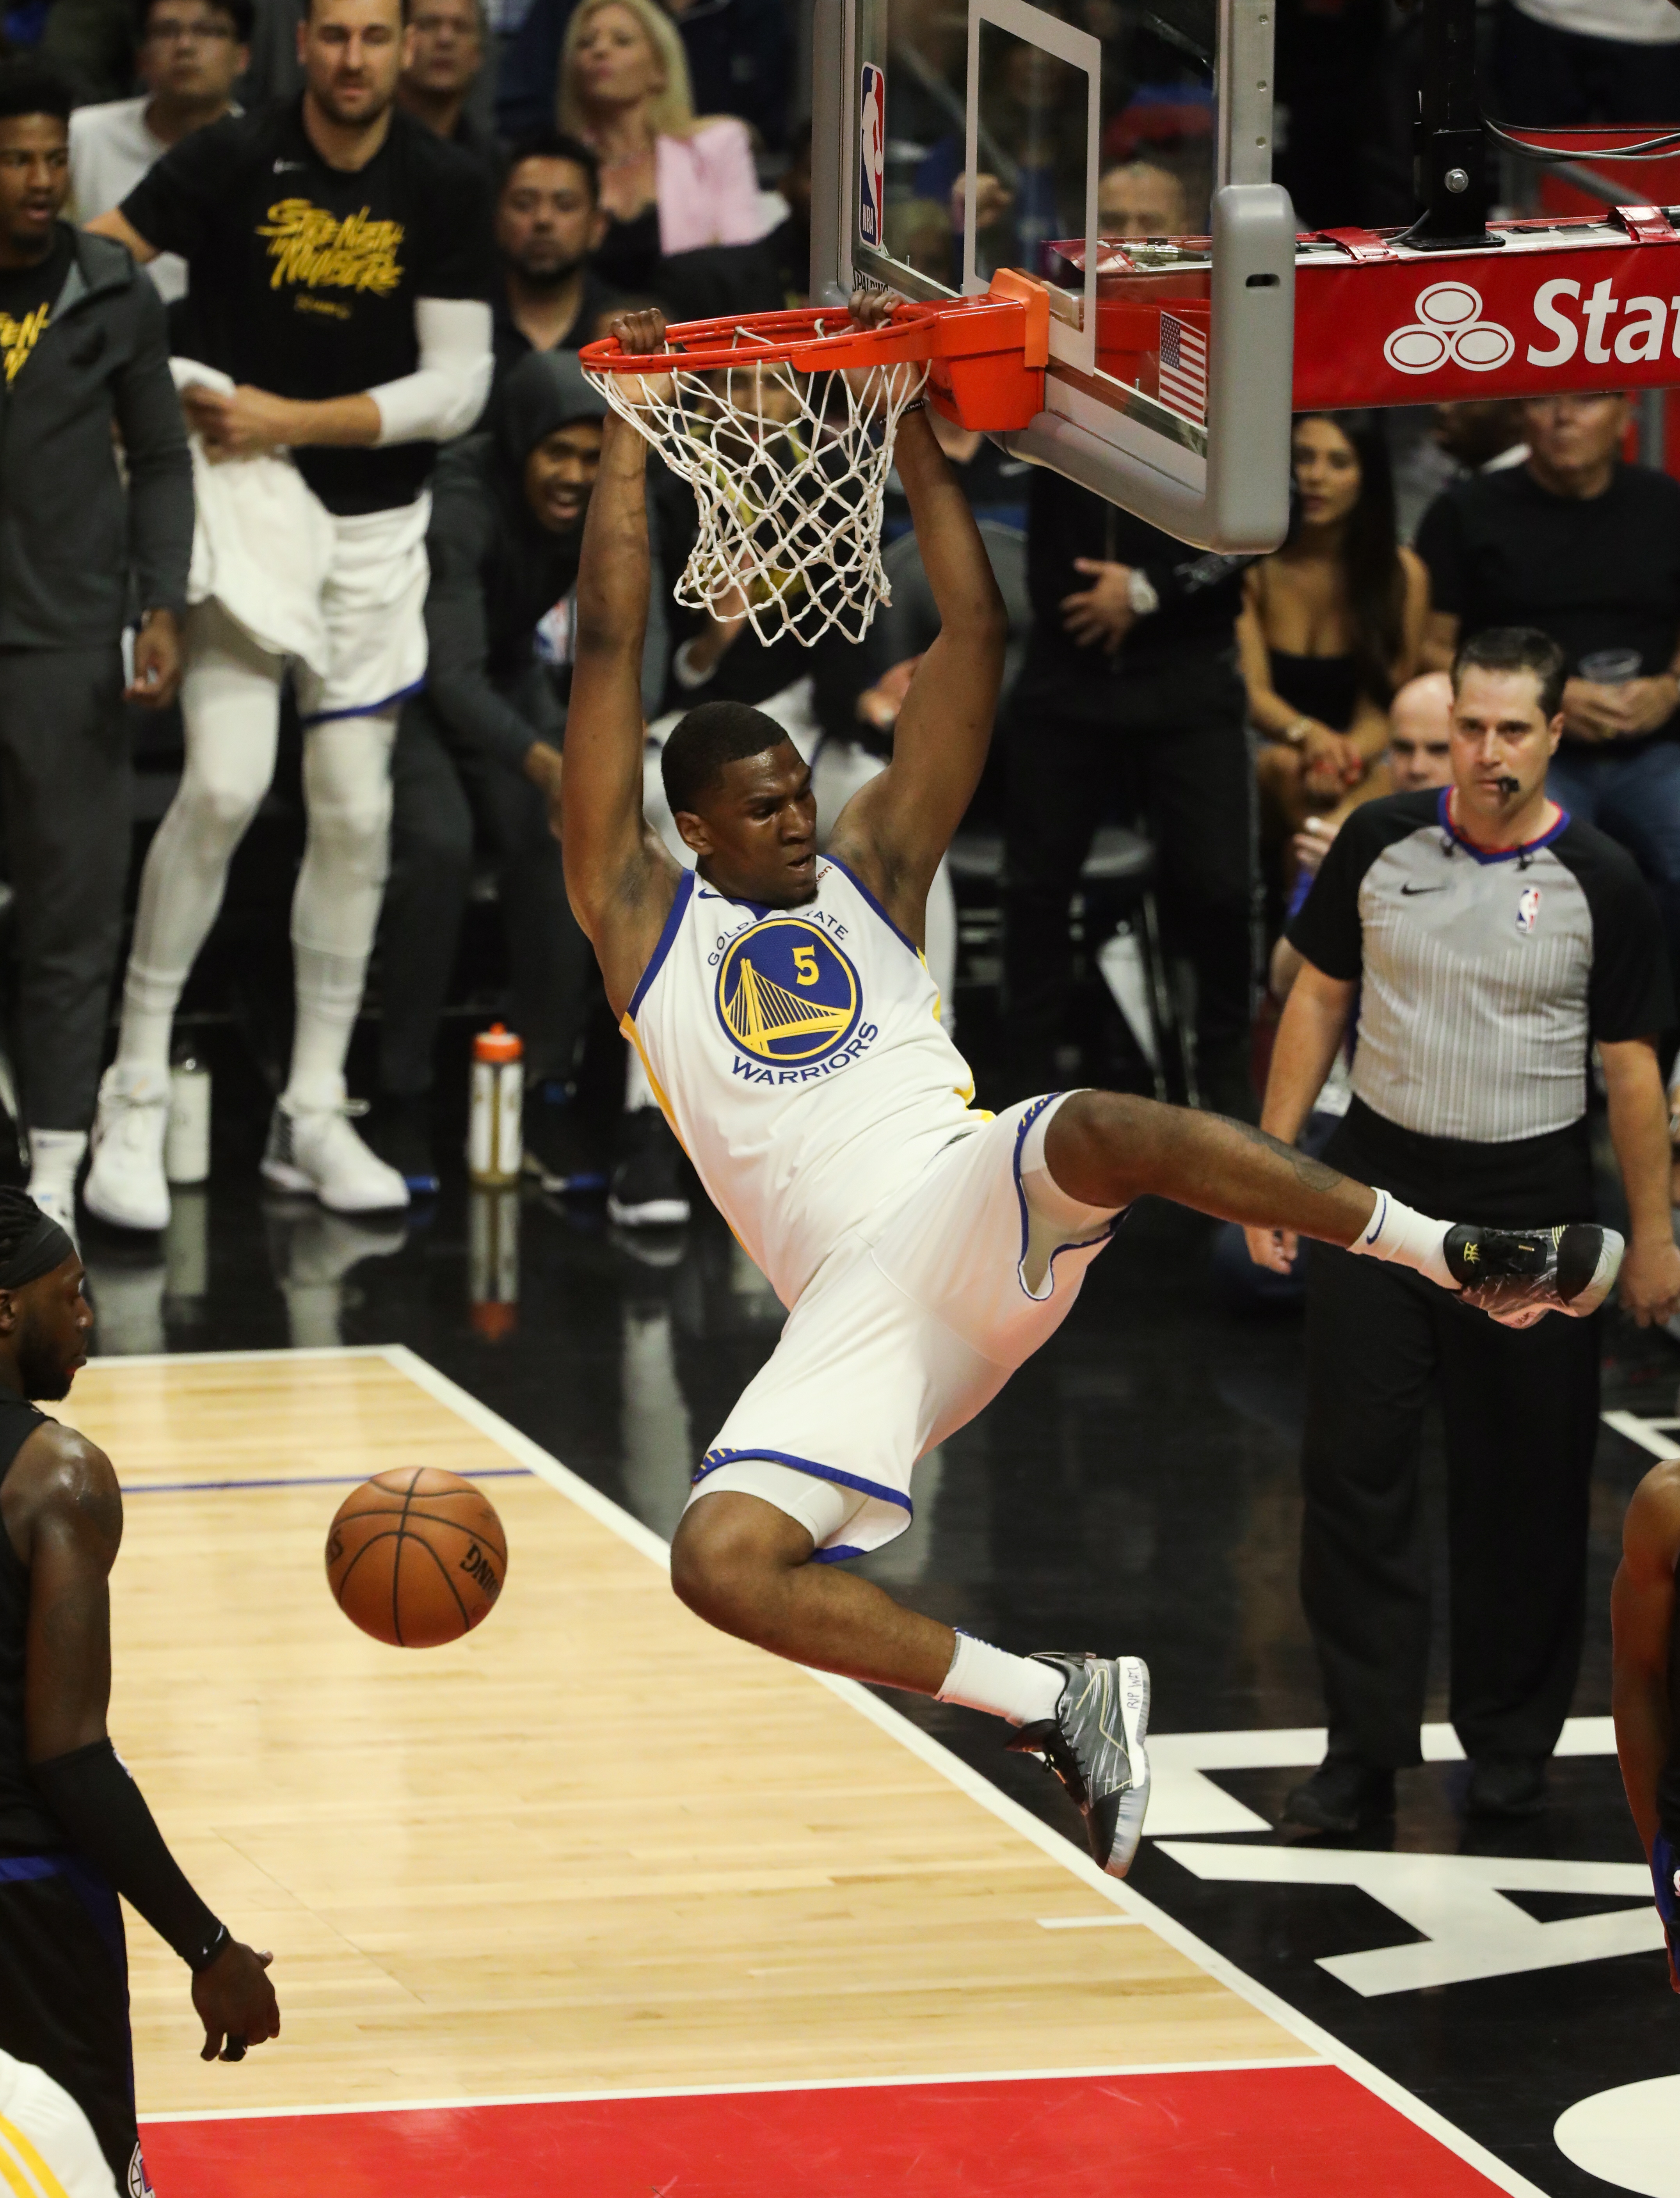 epa07531310 Golden State Warriors forward Kevon Looney dunks against the Los Angeles Clippers during the NBA Western Conference Playoffs basketball game six between the Golden State Warriors and Los Angles Clippers at the Staples Center in Los Angeles, California, USA, 26 April 2019.  EPA/EUGENE GARCIA SHUTTERSTOCK OUT